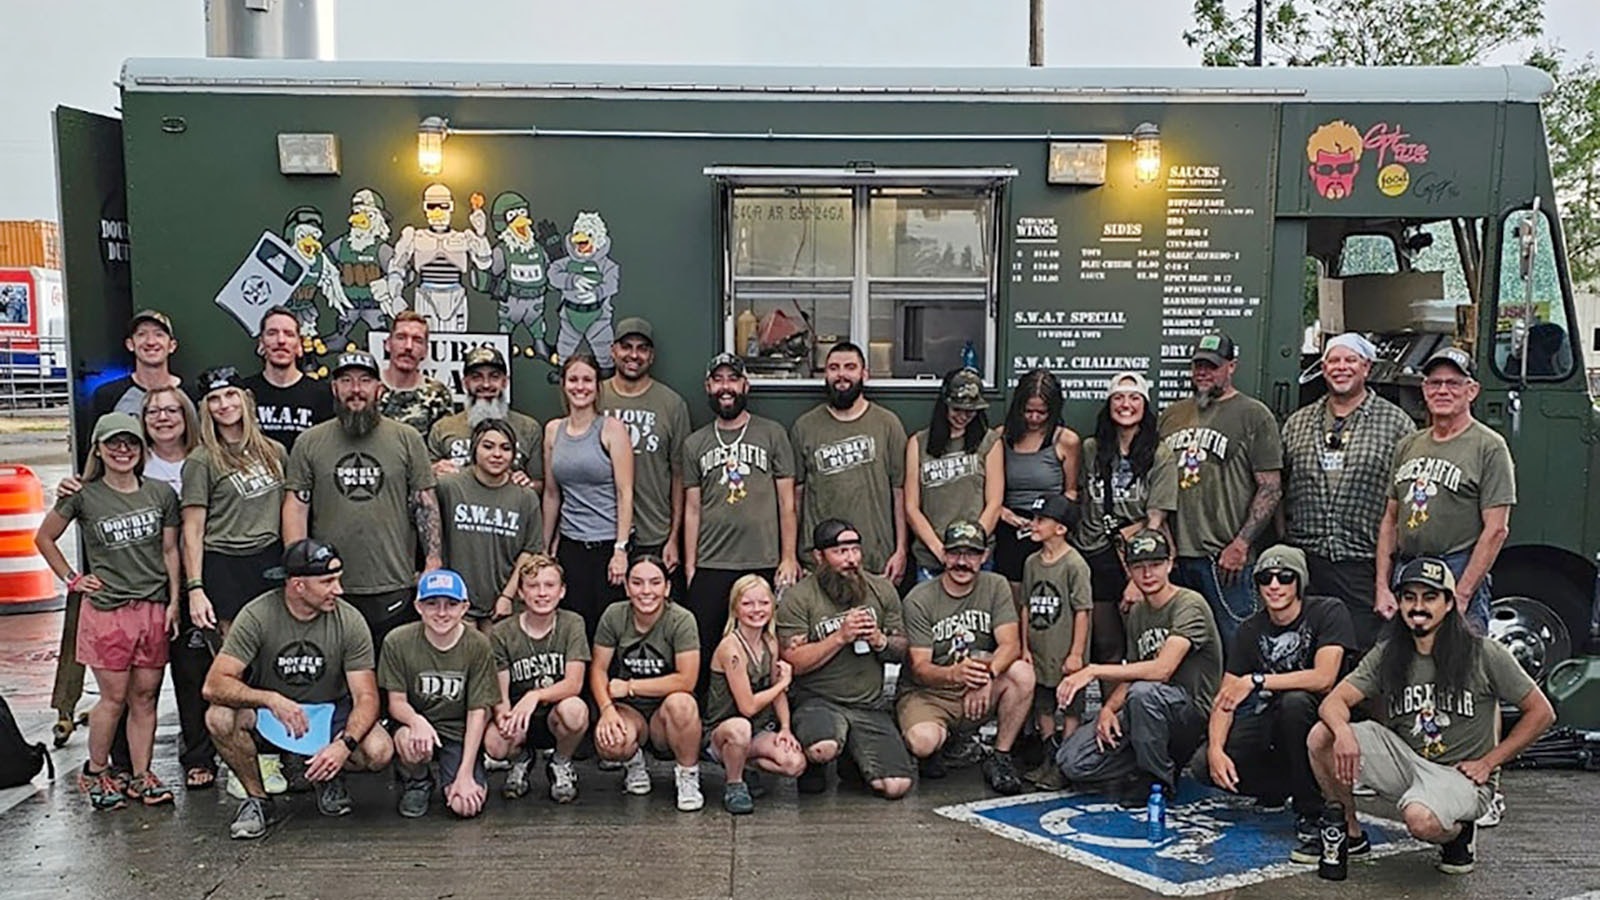 The Weitzels Wings team poses for a photo in front of one of the four food trucks they brought to Cheyenne to smash two world records for selling buffalo wings.